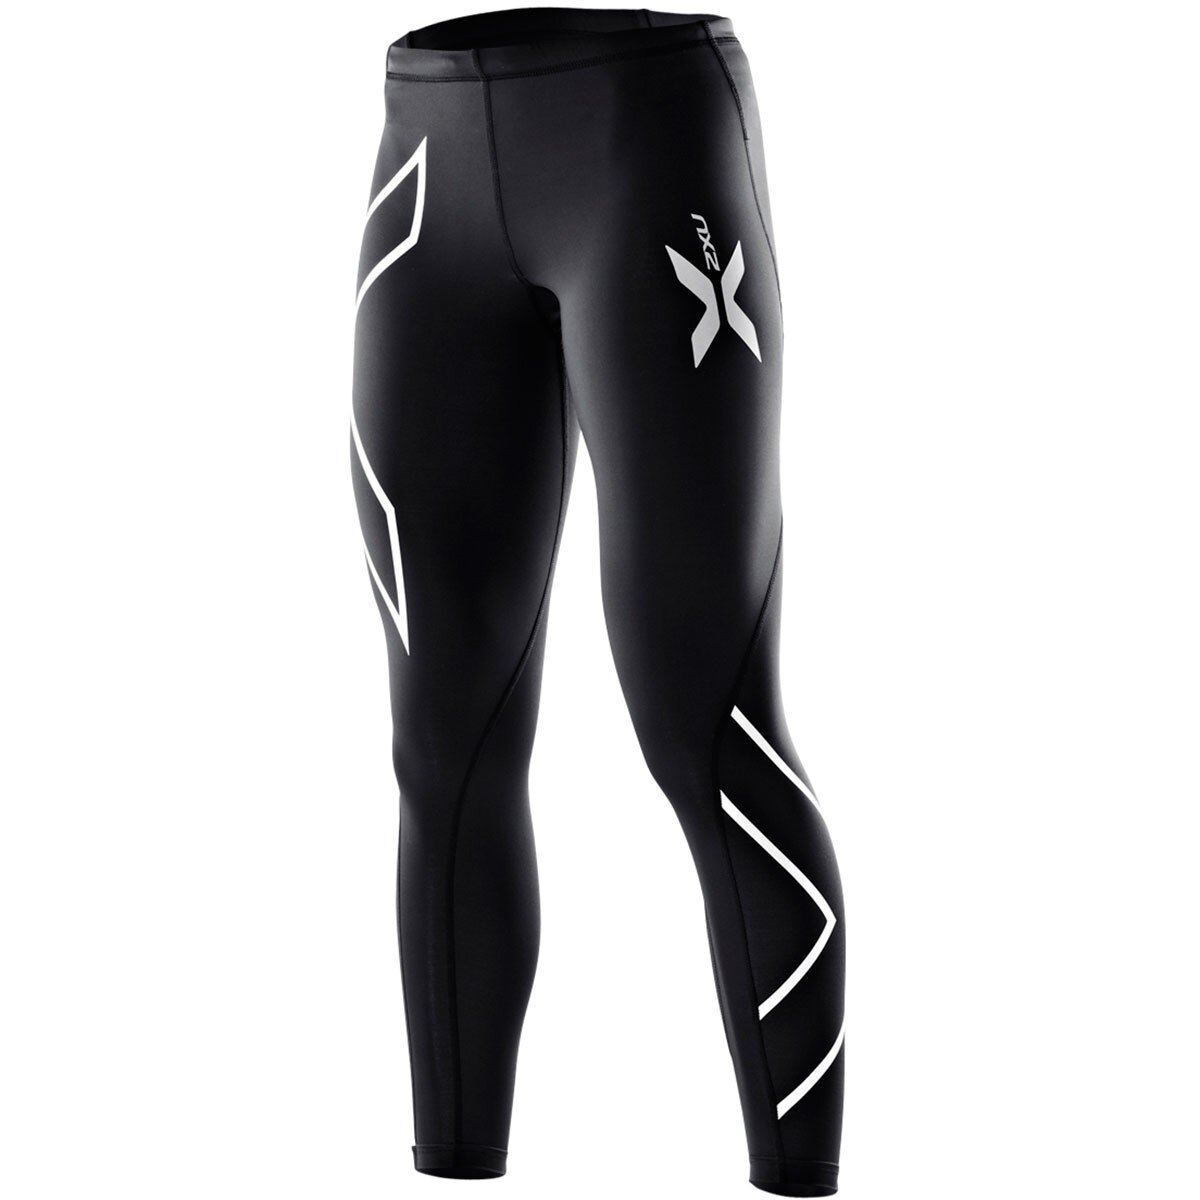 2XU Compression Women's Long Tights - Buy Online - Ph: 1800-370-766 -  AfterPay & ZipPay Available!